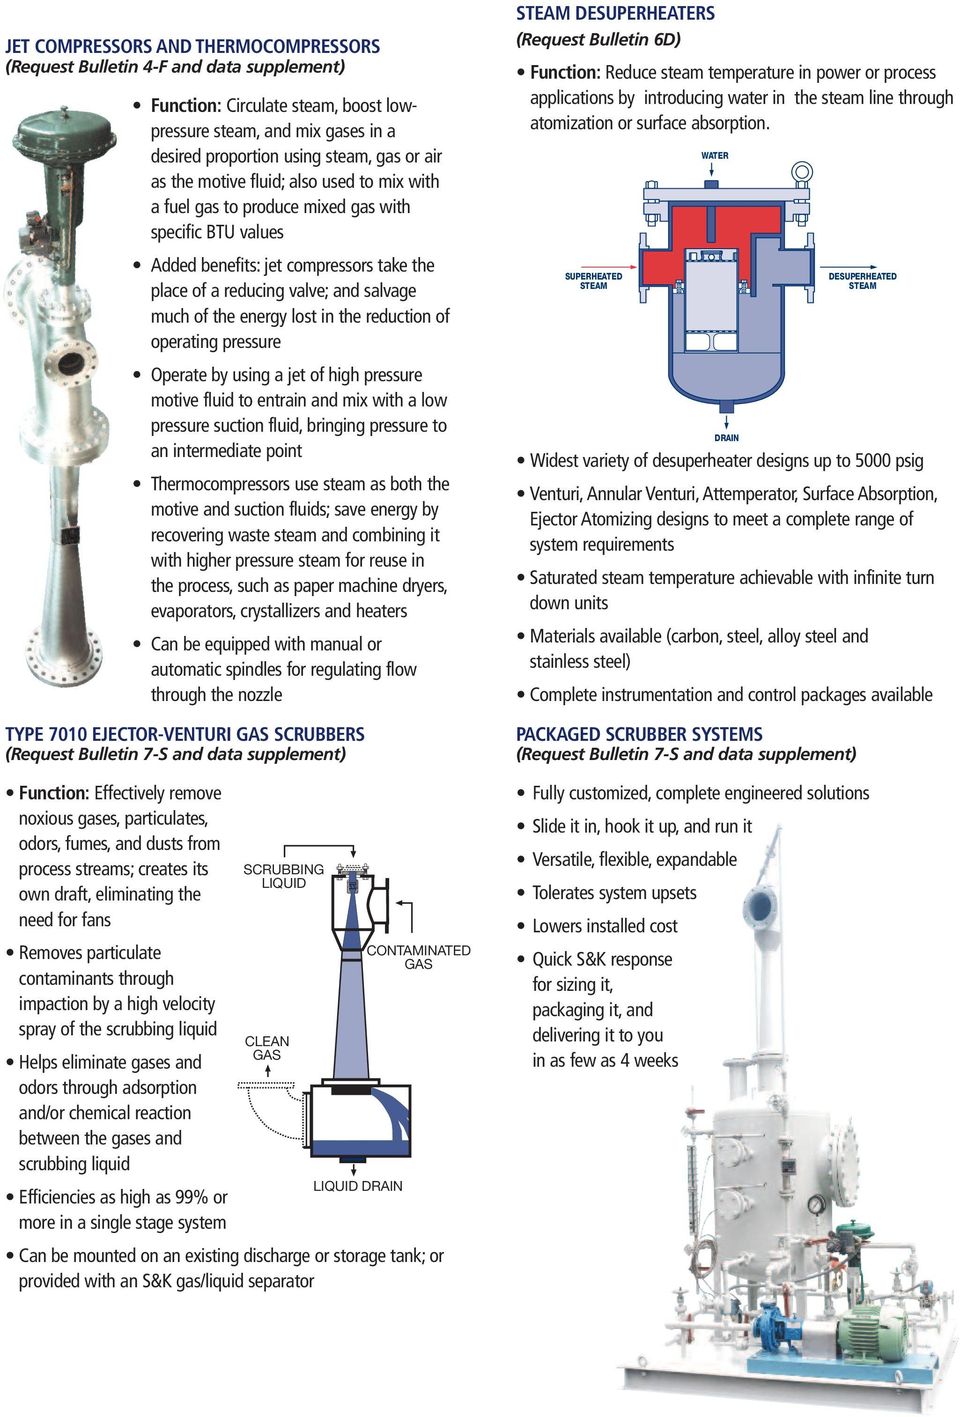 applications by introducing water in the steam line through atomization or surface absorption.